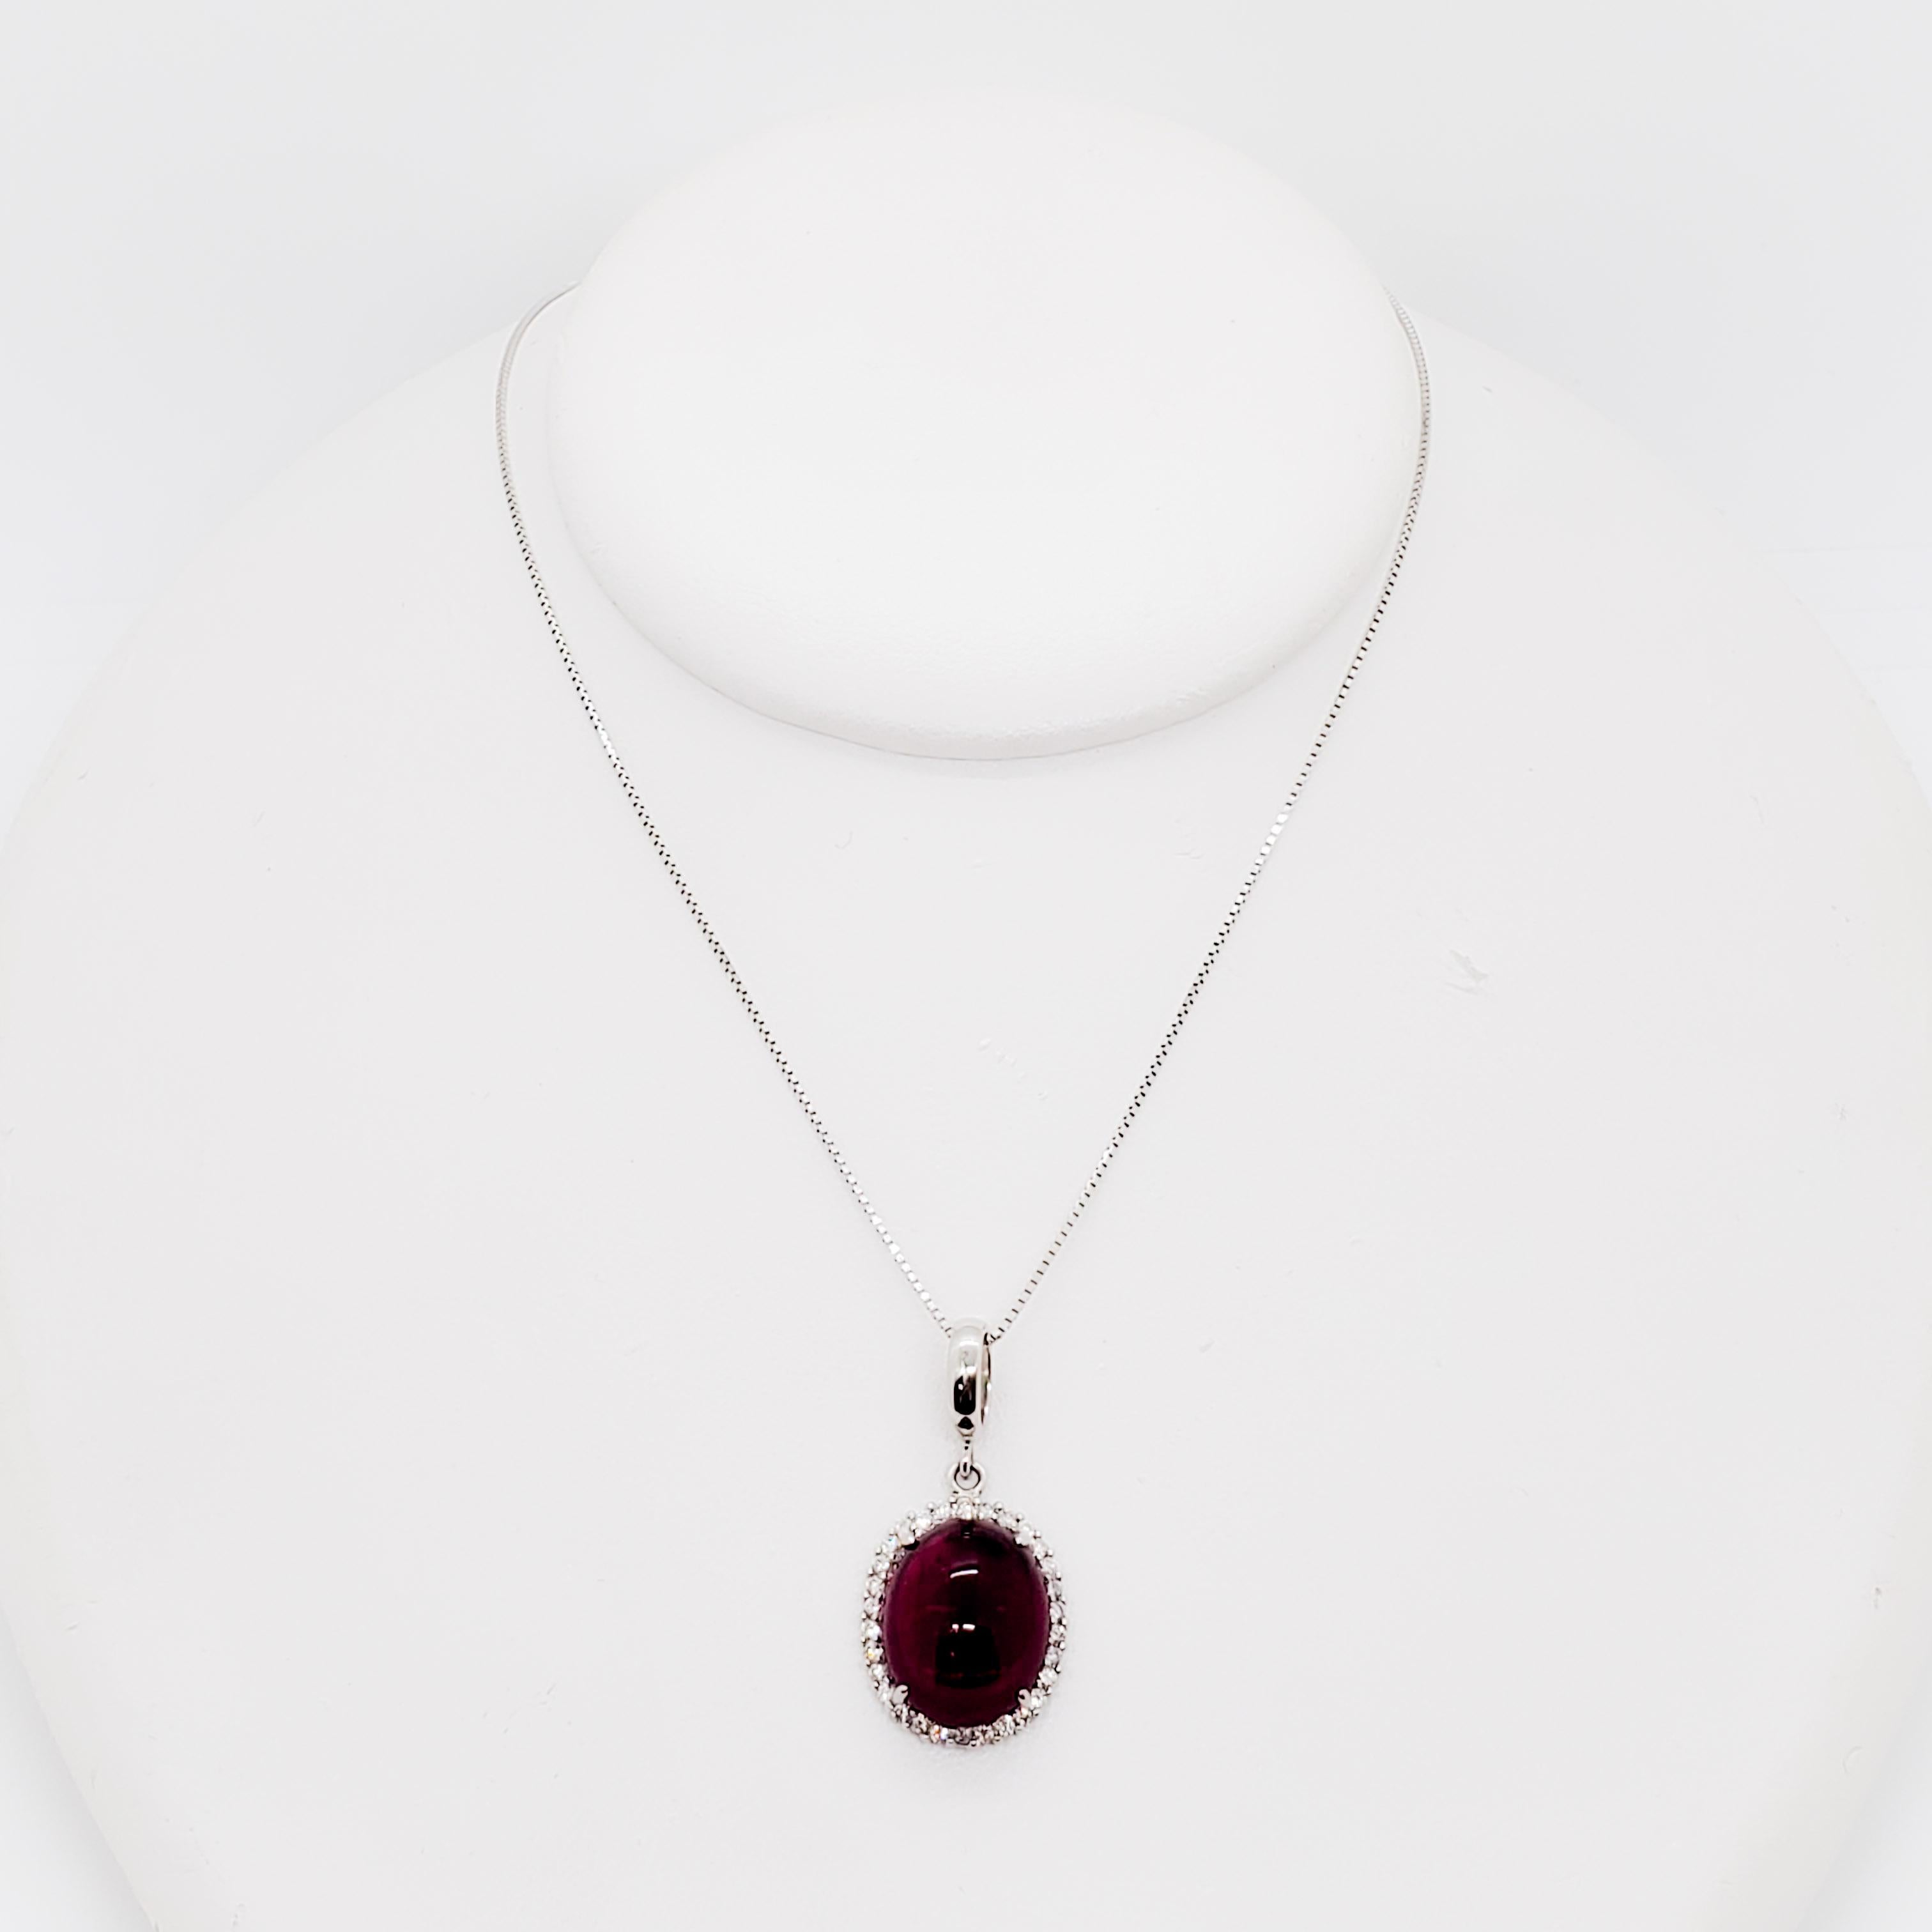 Gorgeous bright red color rubellite oval cabochon weighing 11.48 ct. with 1.35 ct. good quality, white, and bright diamond rounds.  Handmade 18k white gold mounting, length of necklace is 18